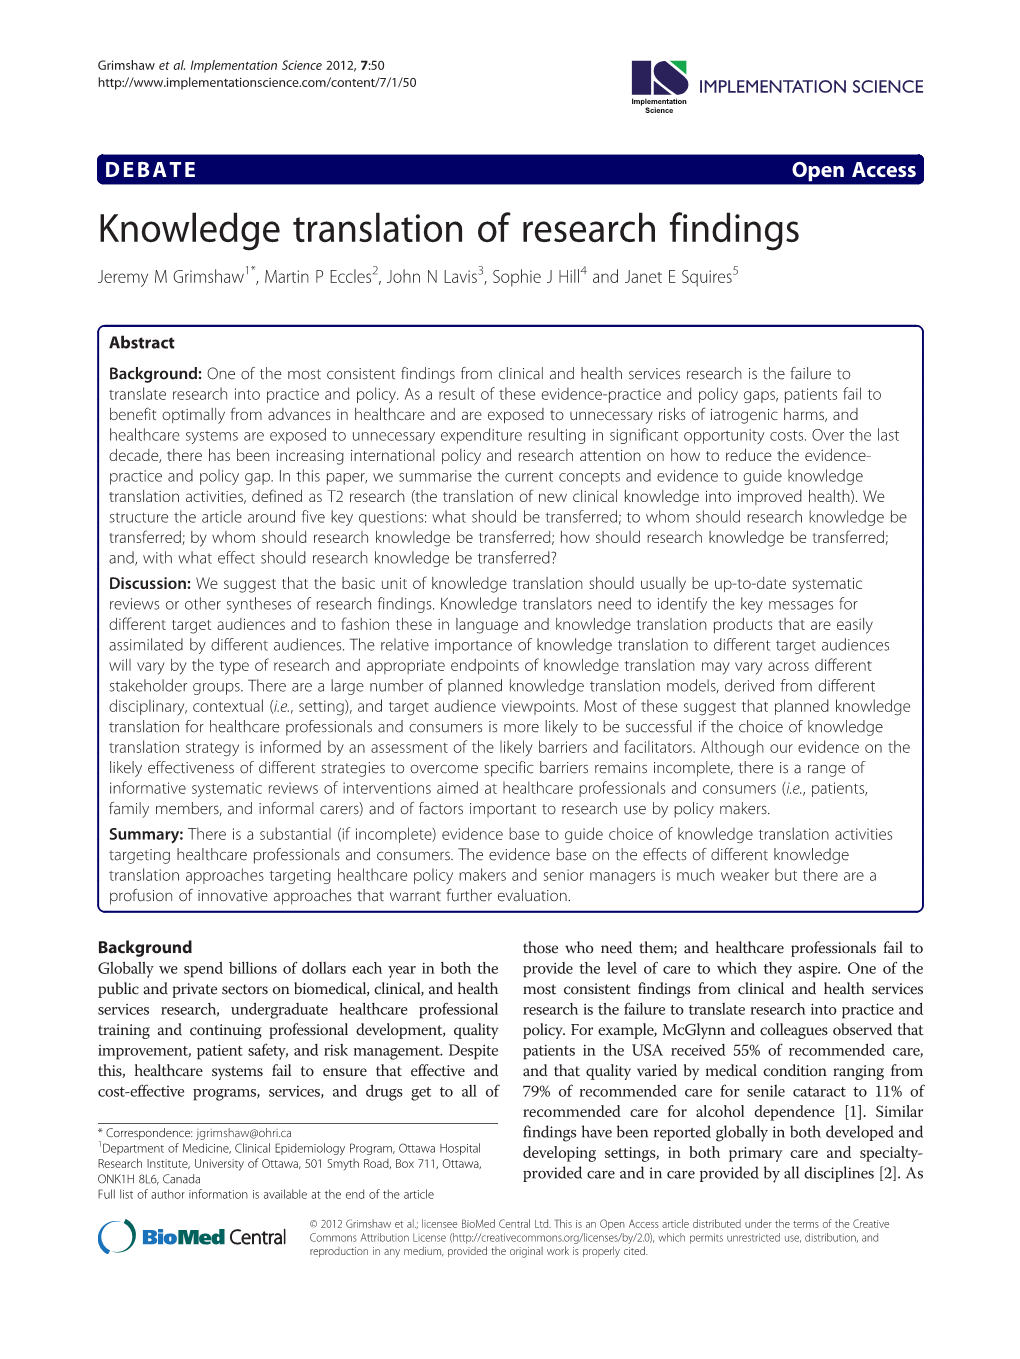 Knowledge Translation of Research Findings Jeremy M Grimshaw1*, Martin P Eccles2, John N Lavis3, Sophie J Hill4 and Janet E Squires5